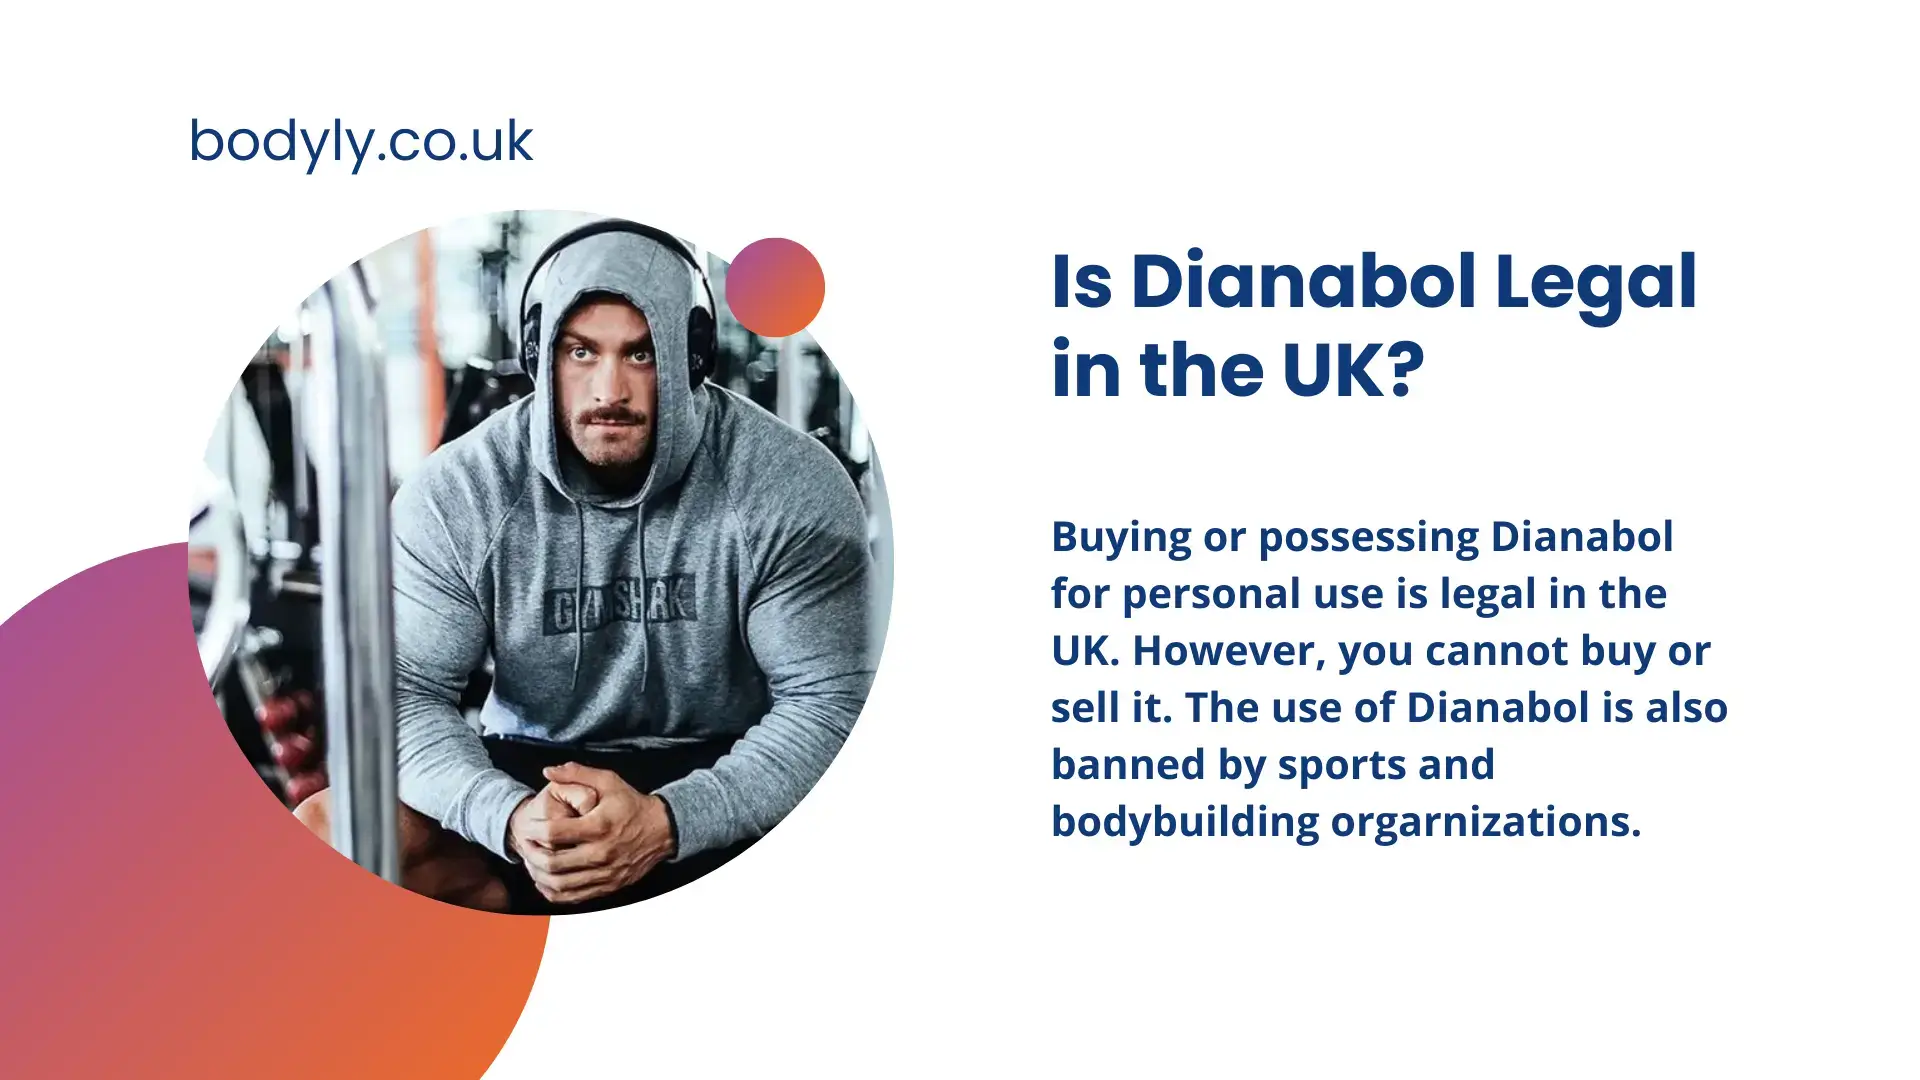 is Dianabol legal in the UK